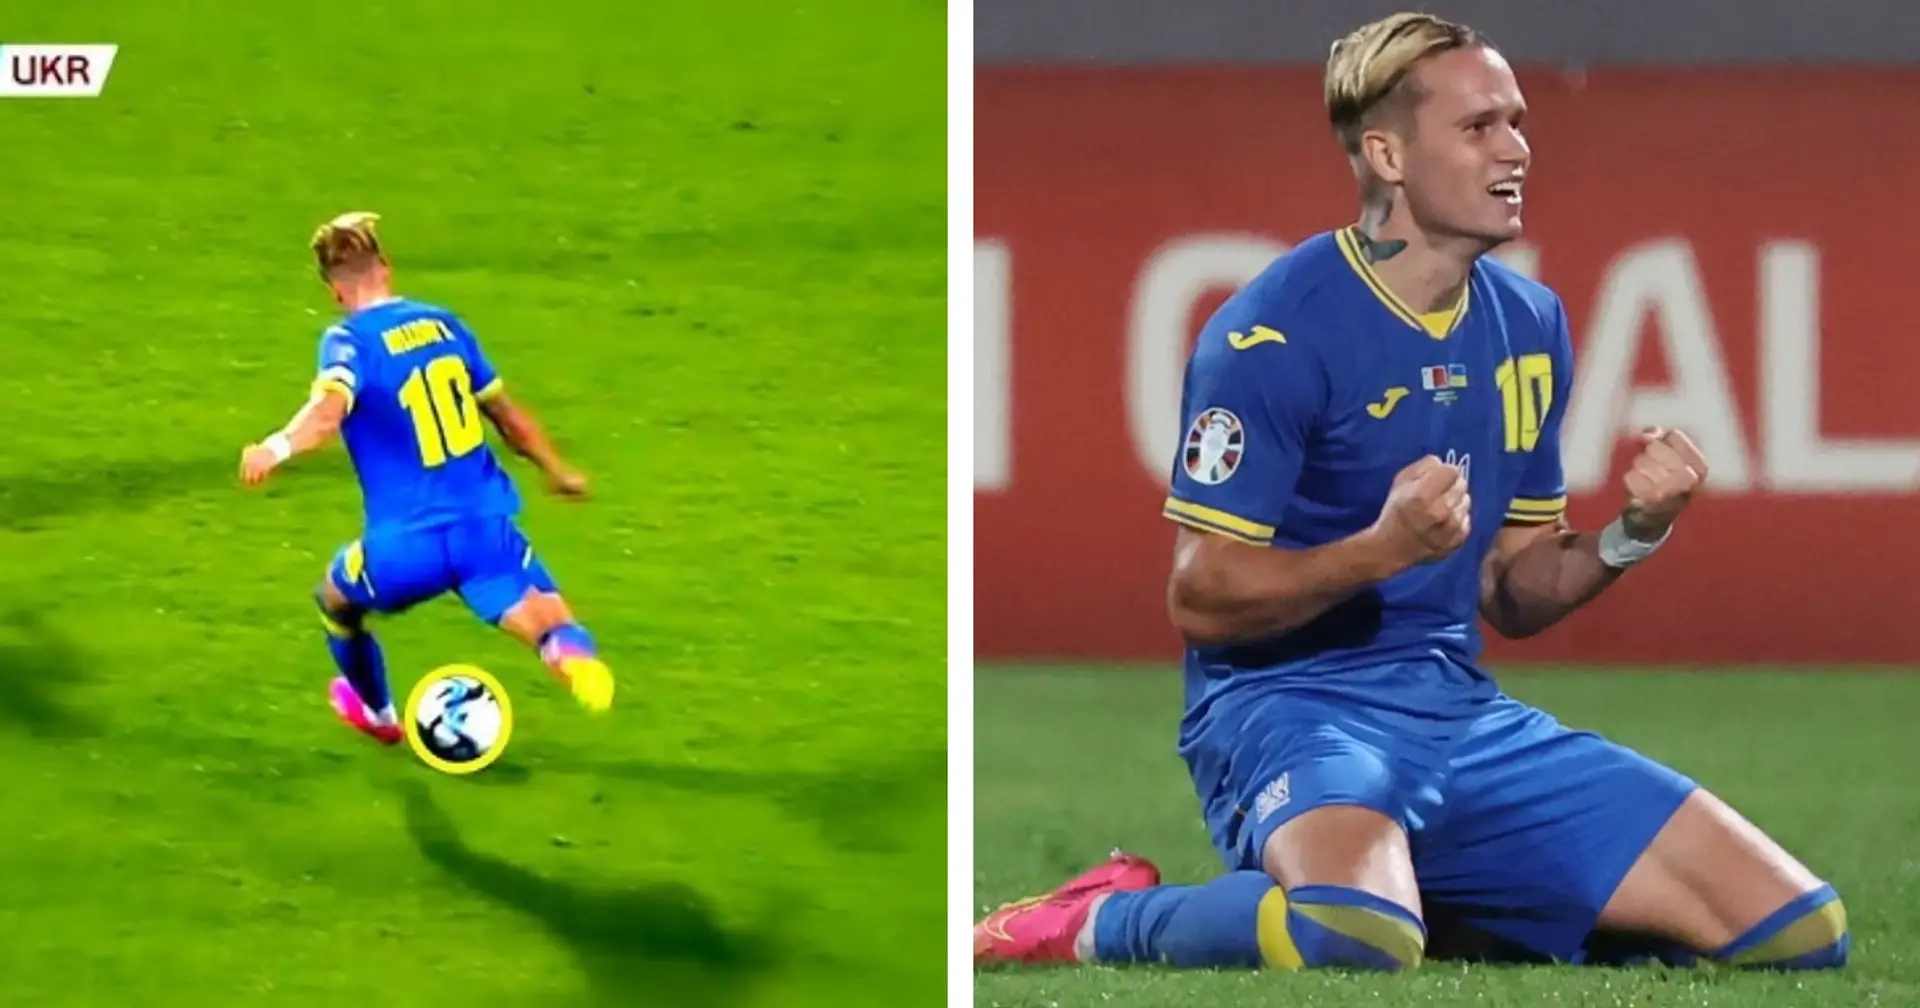 'If he does this vs Arsenal my lungs might collapse': Fans react to Mudryk screamer for Ukraine